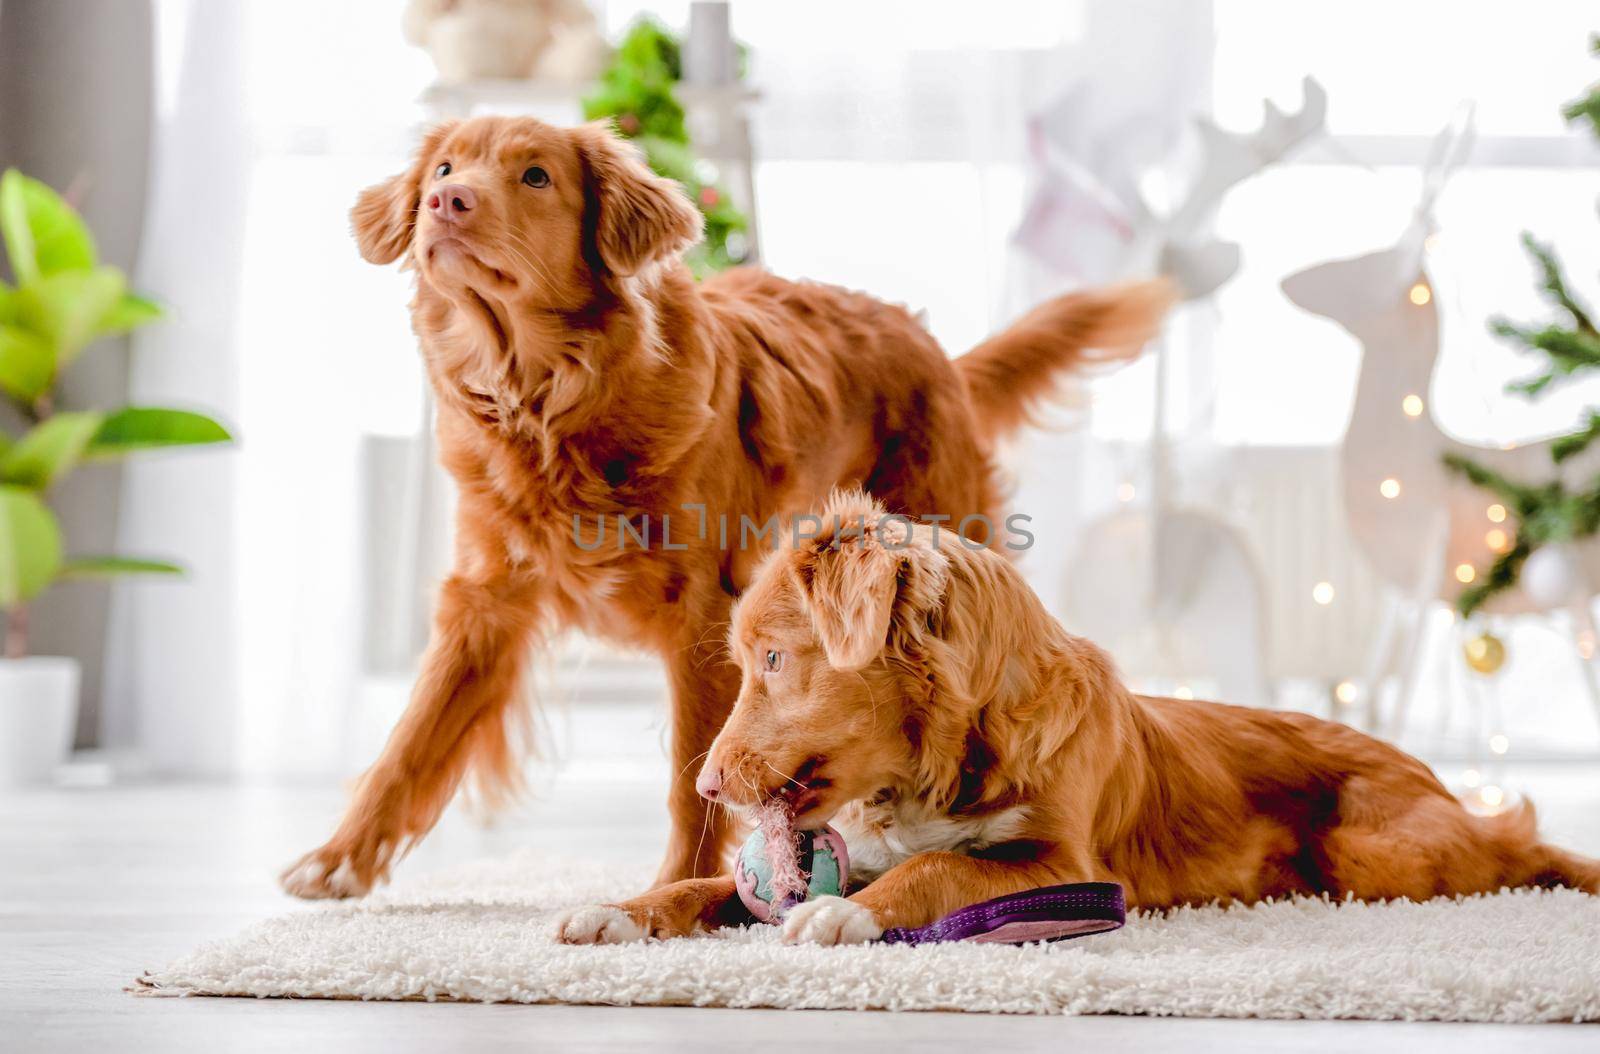 Toller retriever dogs in Christmas time lying on floor at cozy home with New Year festive decoration, tree and lights. Doggy pets and magic Xmas atmosphere